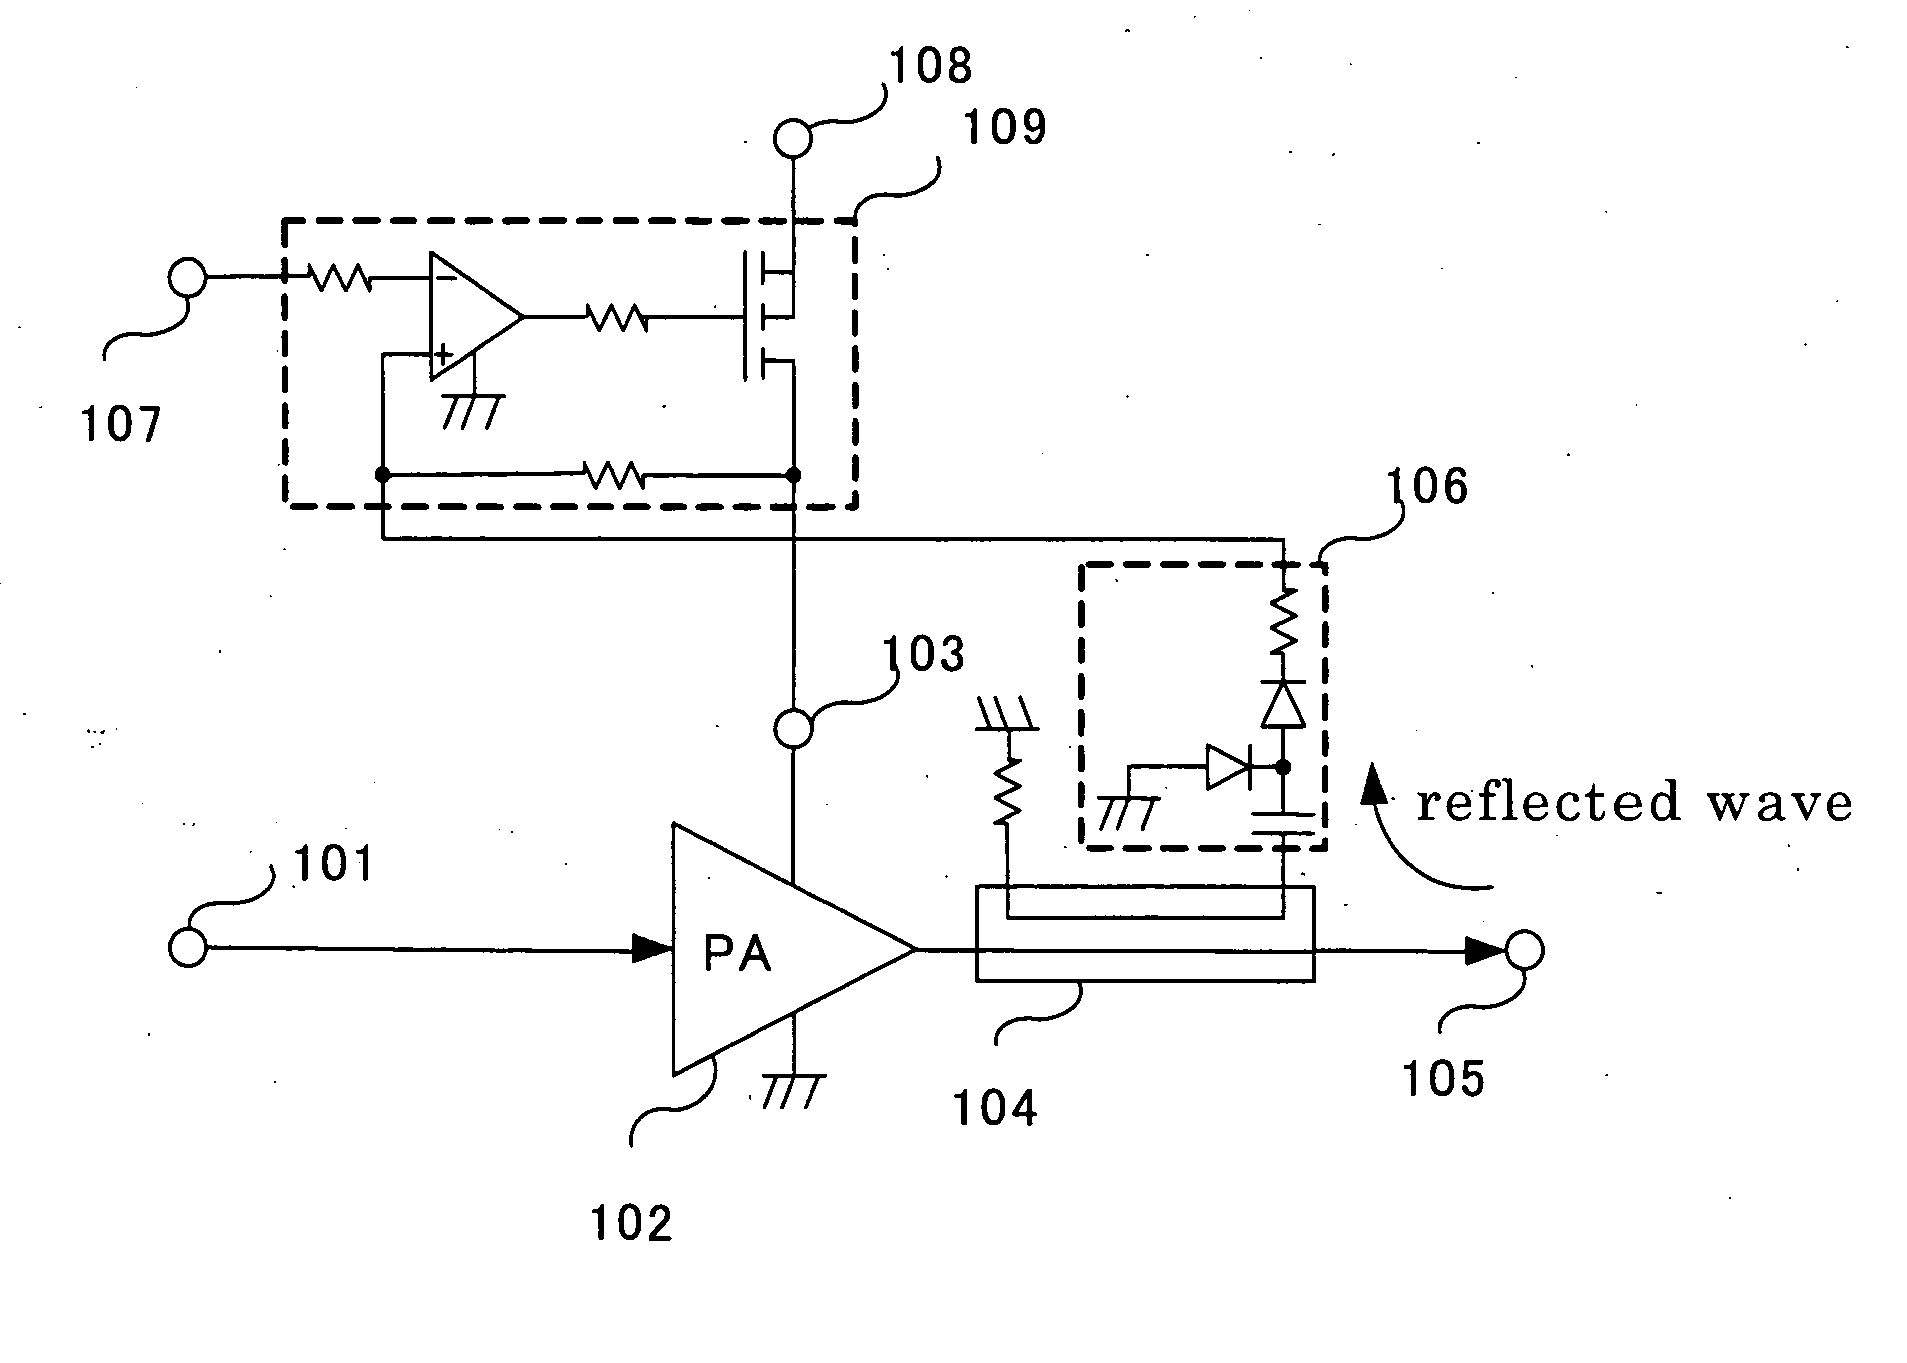 Protection circuit for power amplifier